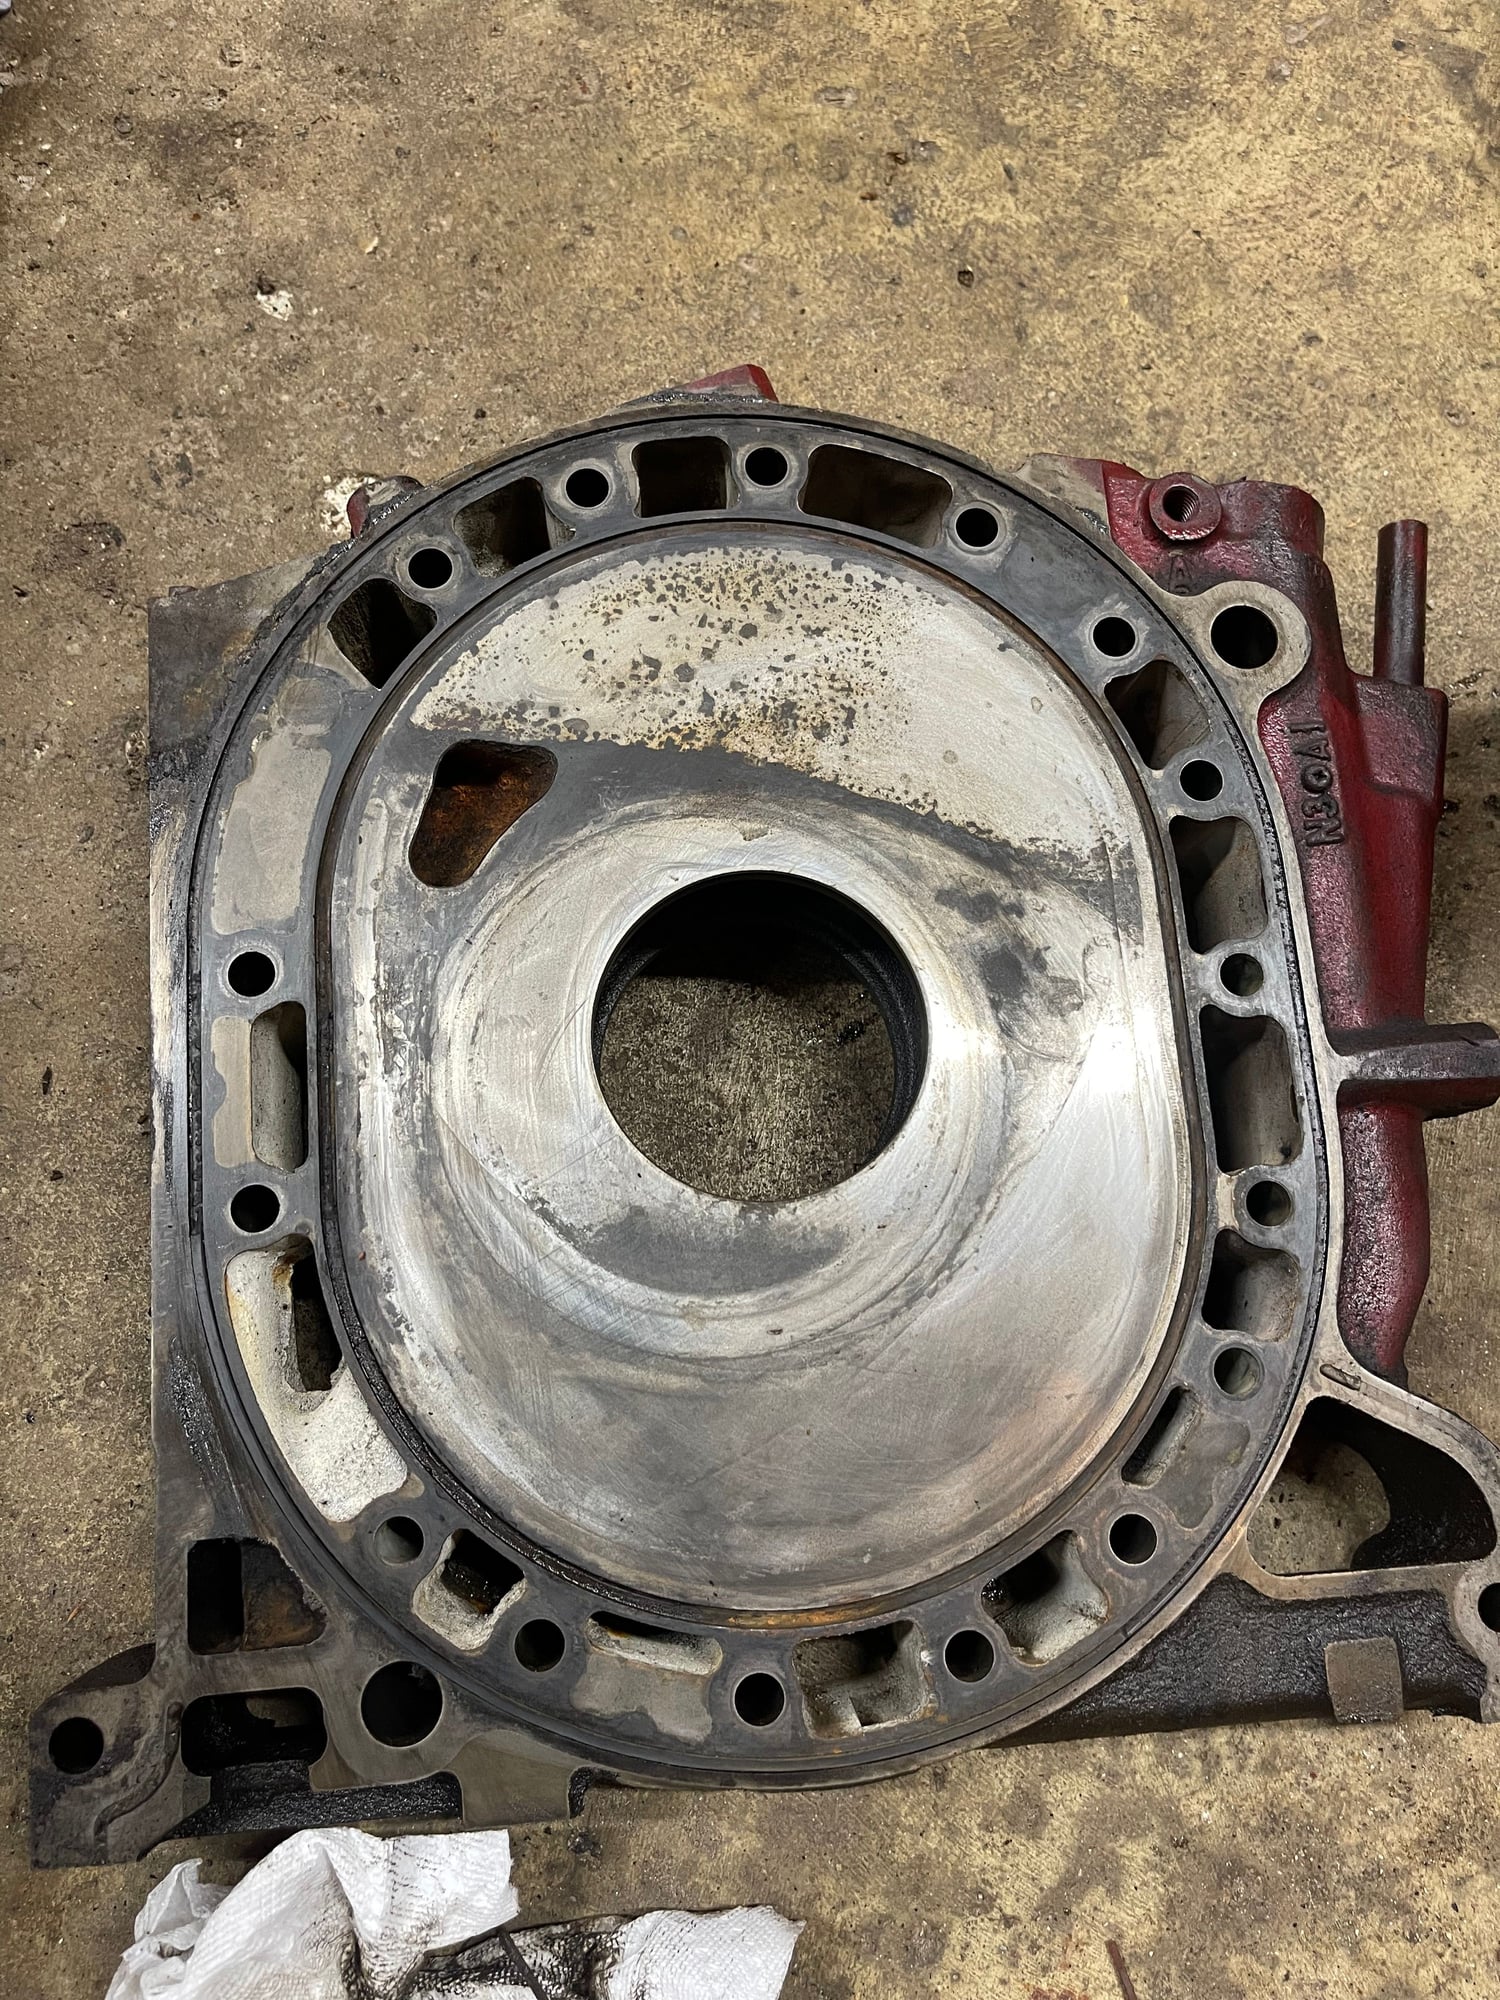 Engine - Complete - 13brew keg part out. - Used - 1993 to 1995 Mazda RX-7 - Saint Anne, IL 60964, United States